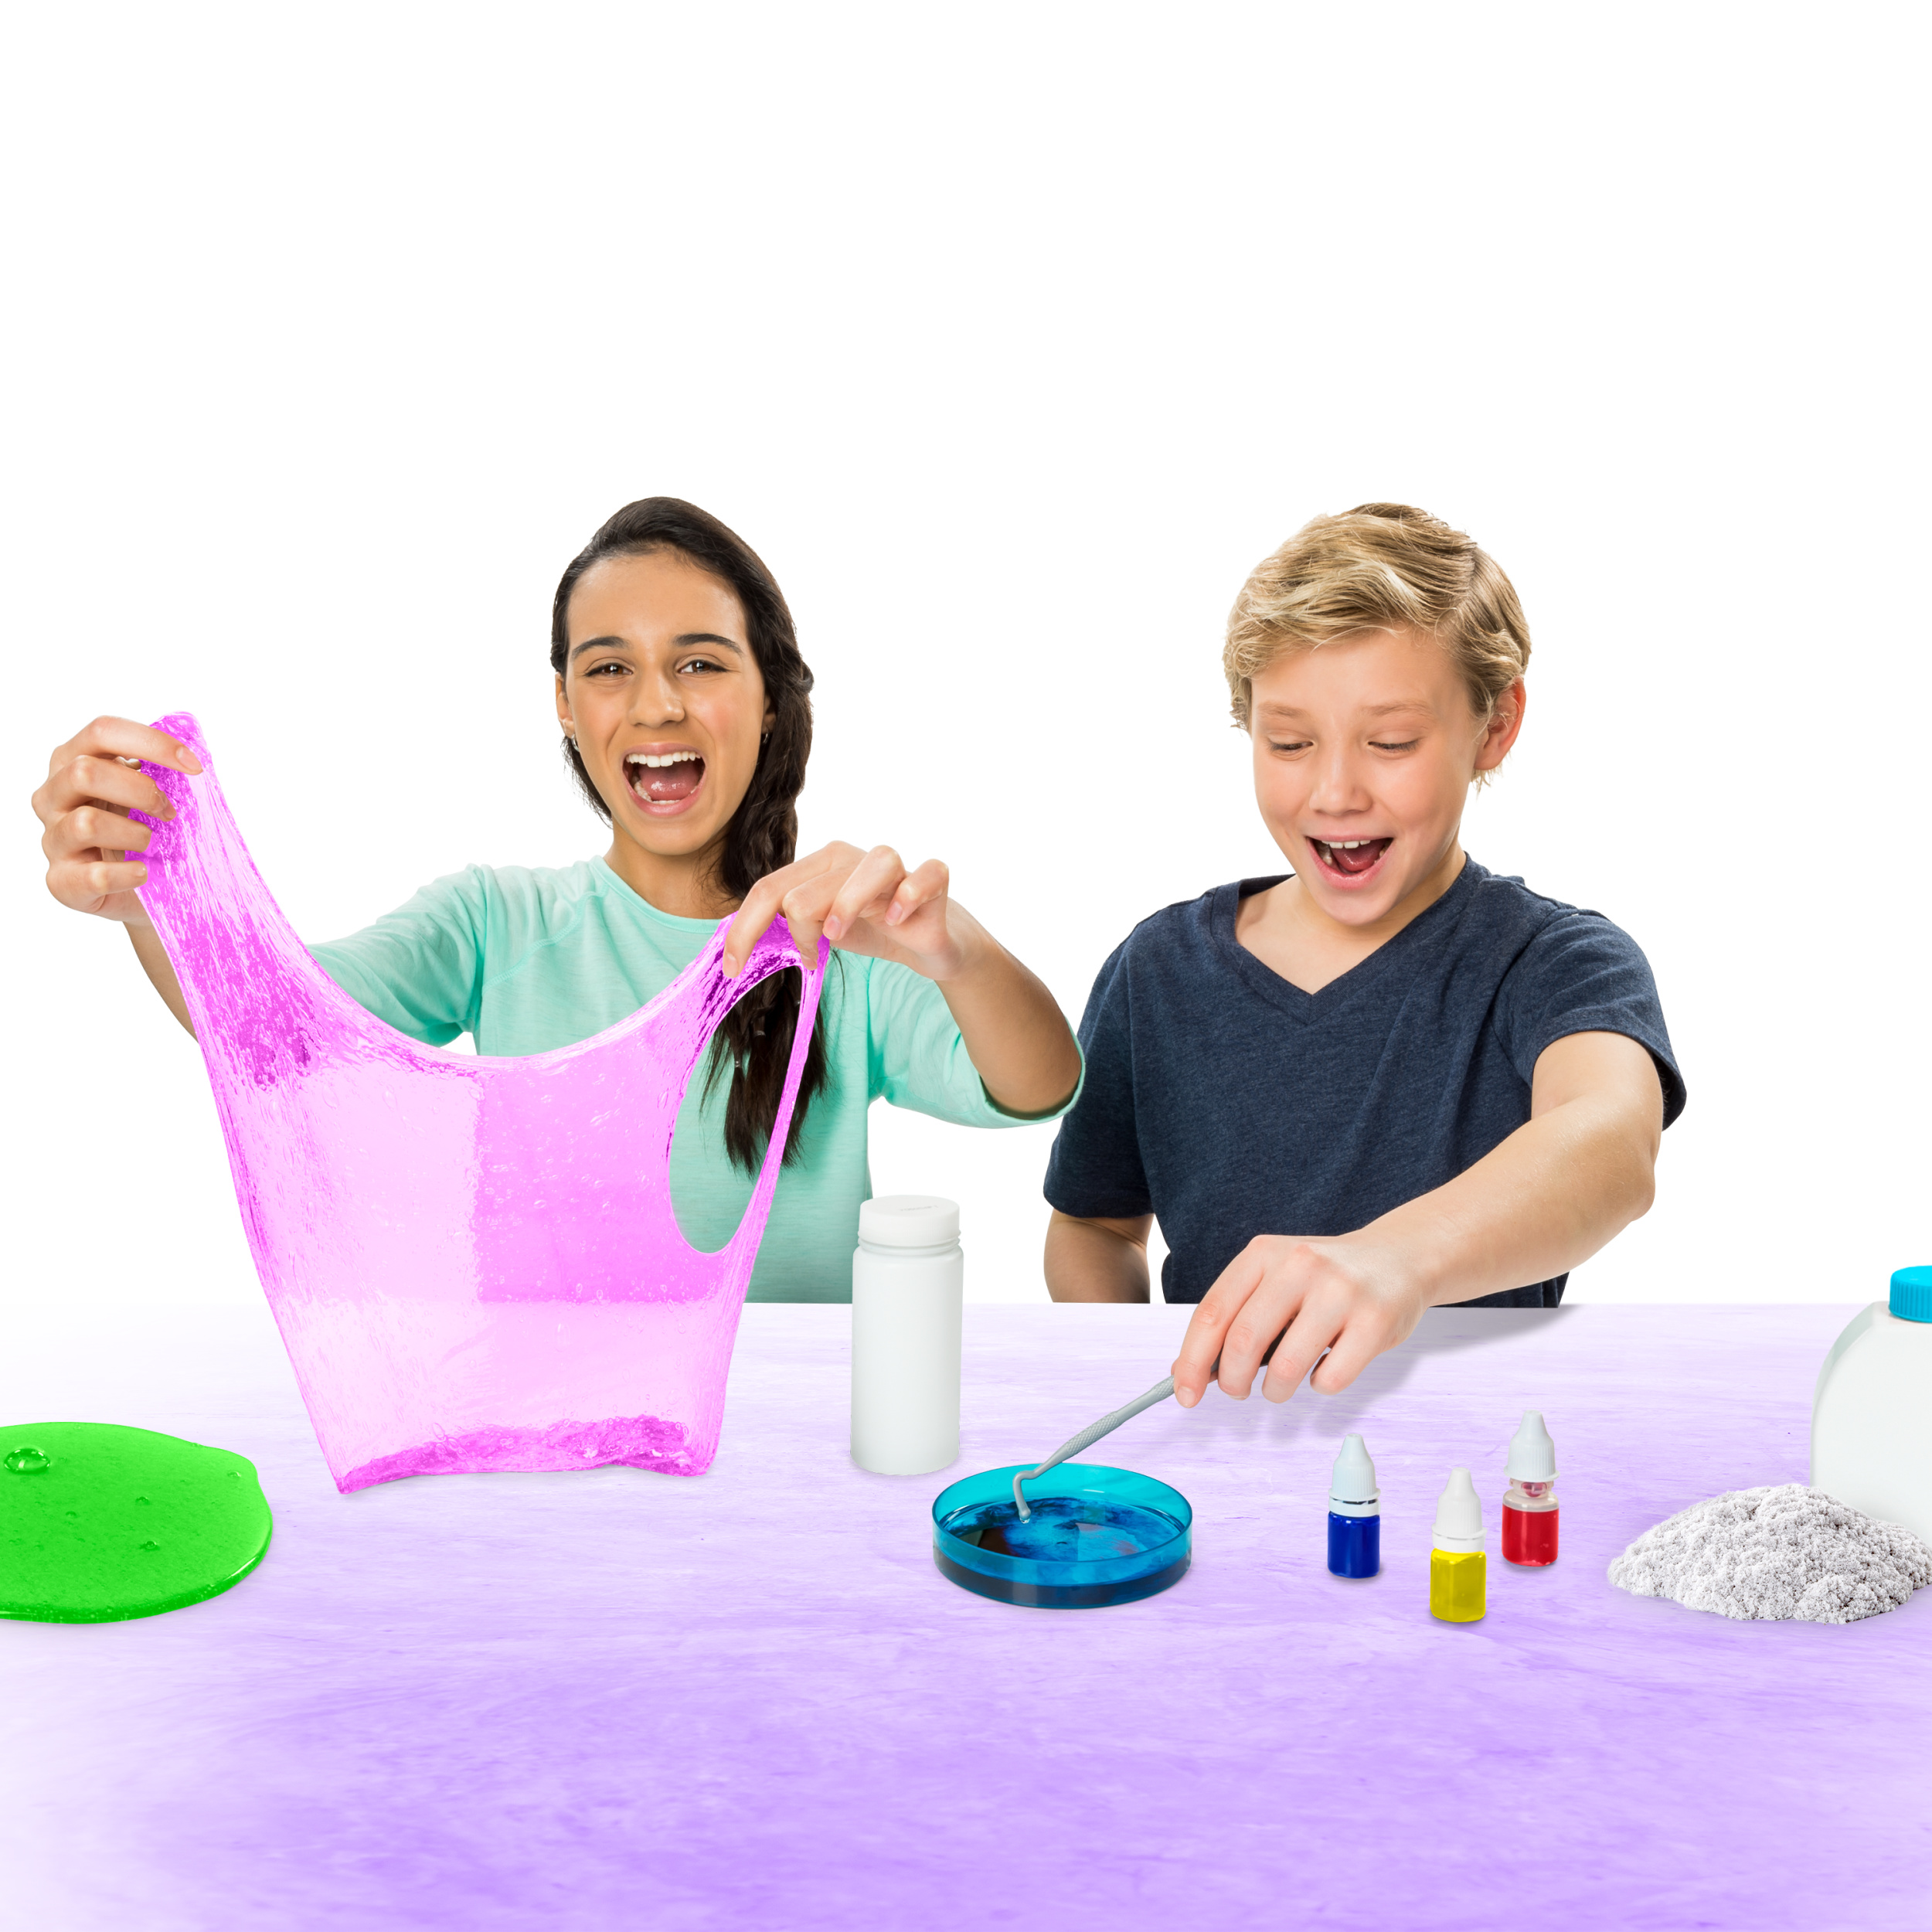 Kinetic Sand, Sand Slime Lab with Scents, All-in-One Slime Activity Kit, for Kids Aged 8 and up (Edition May Vary) - image 4 of 8